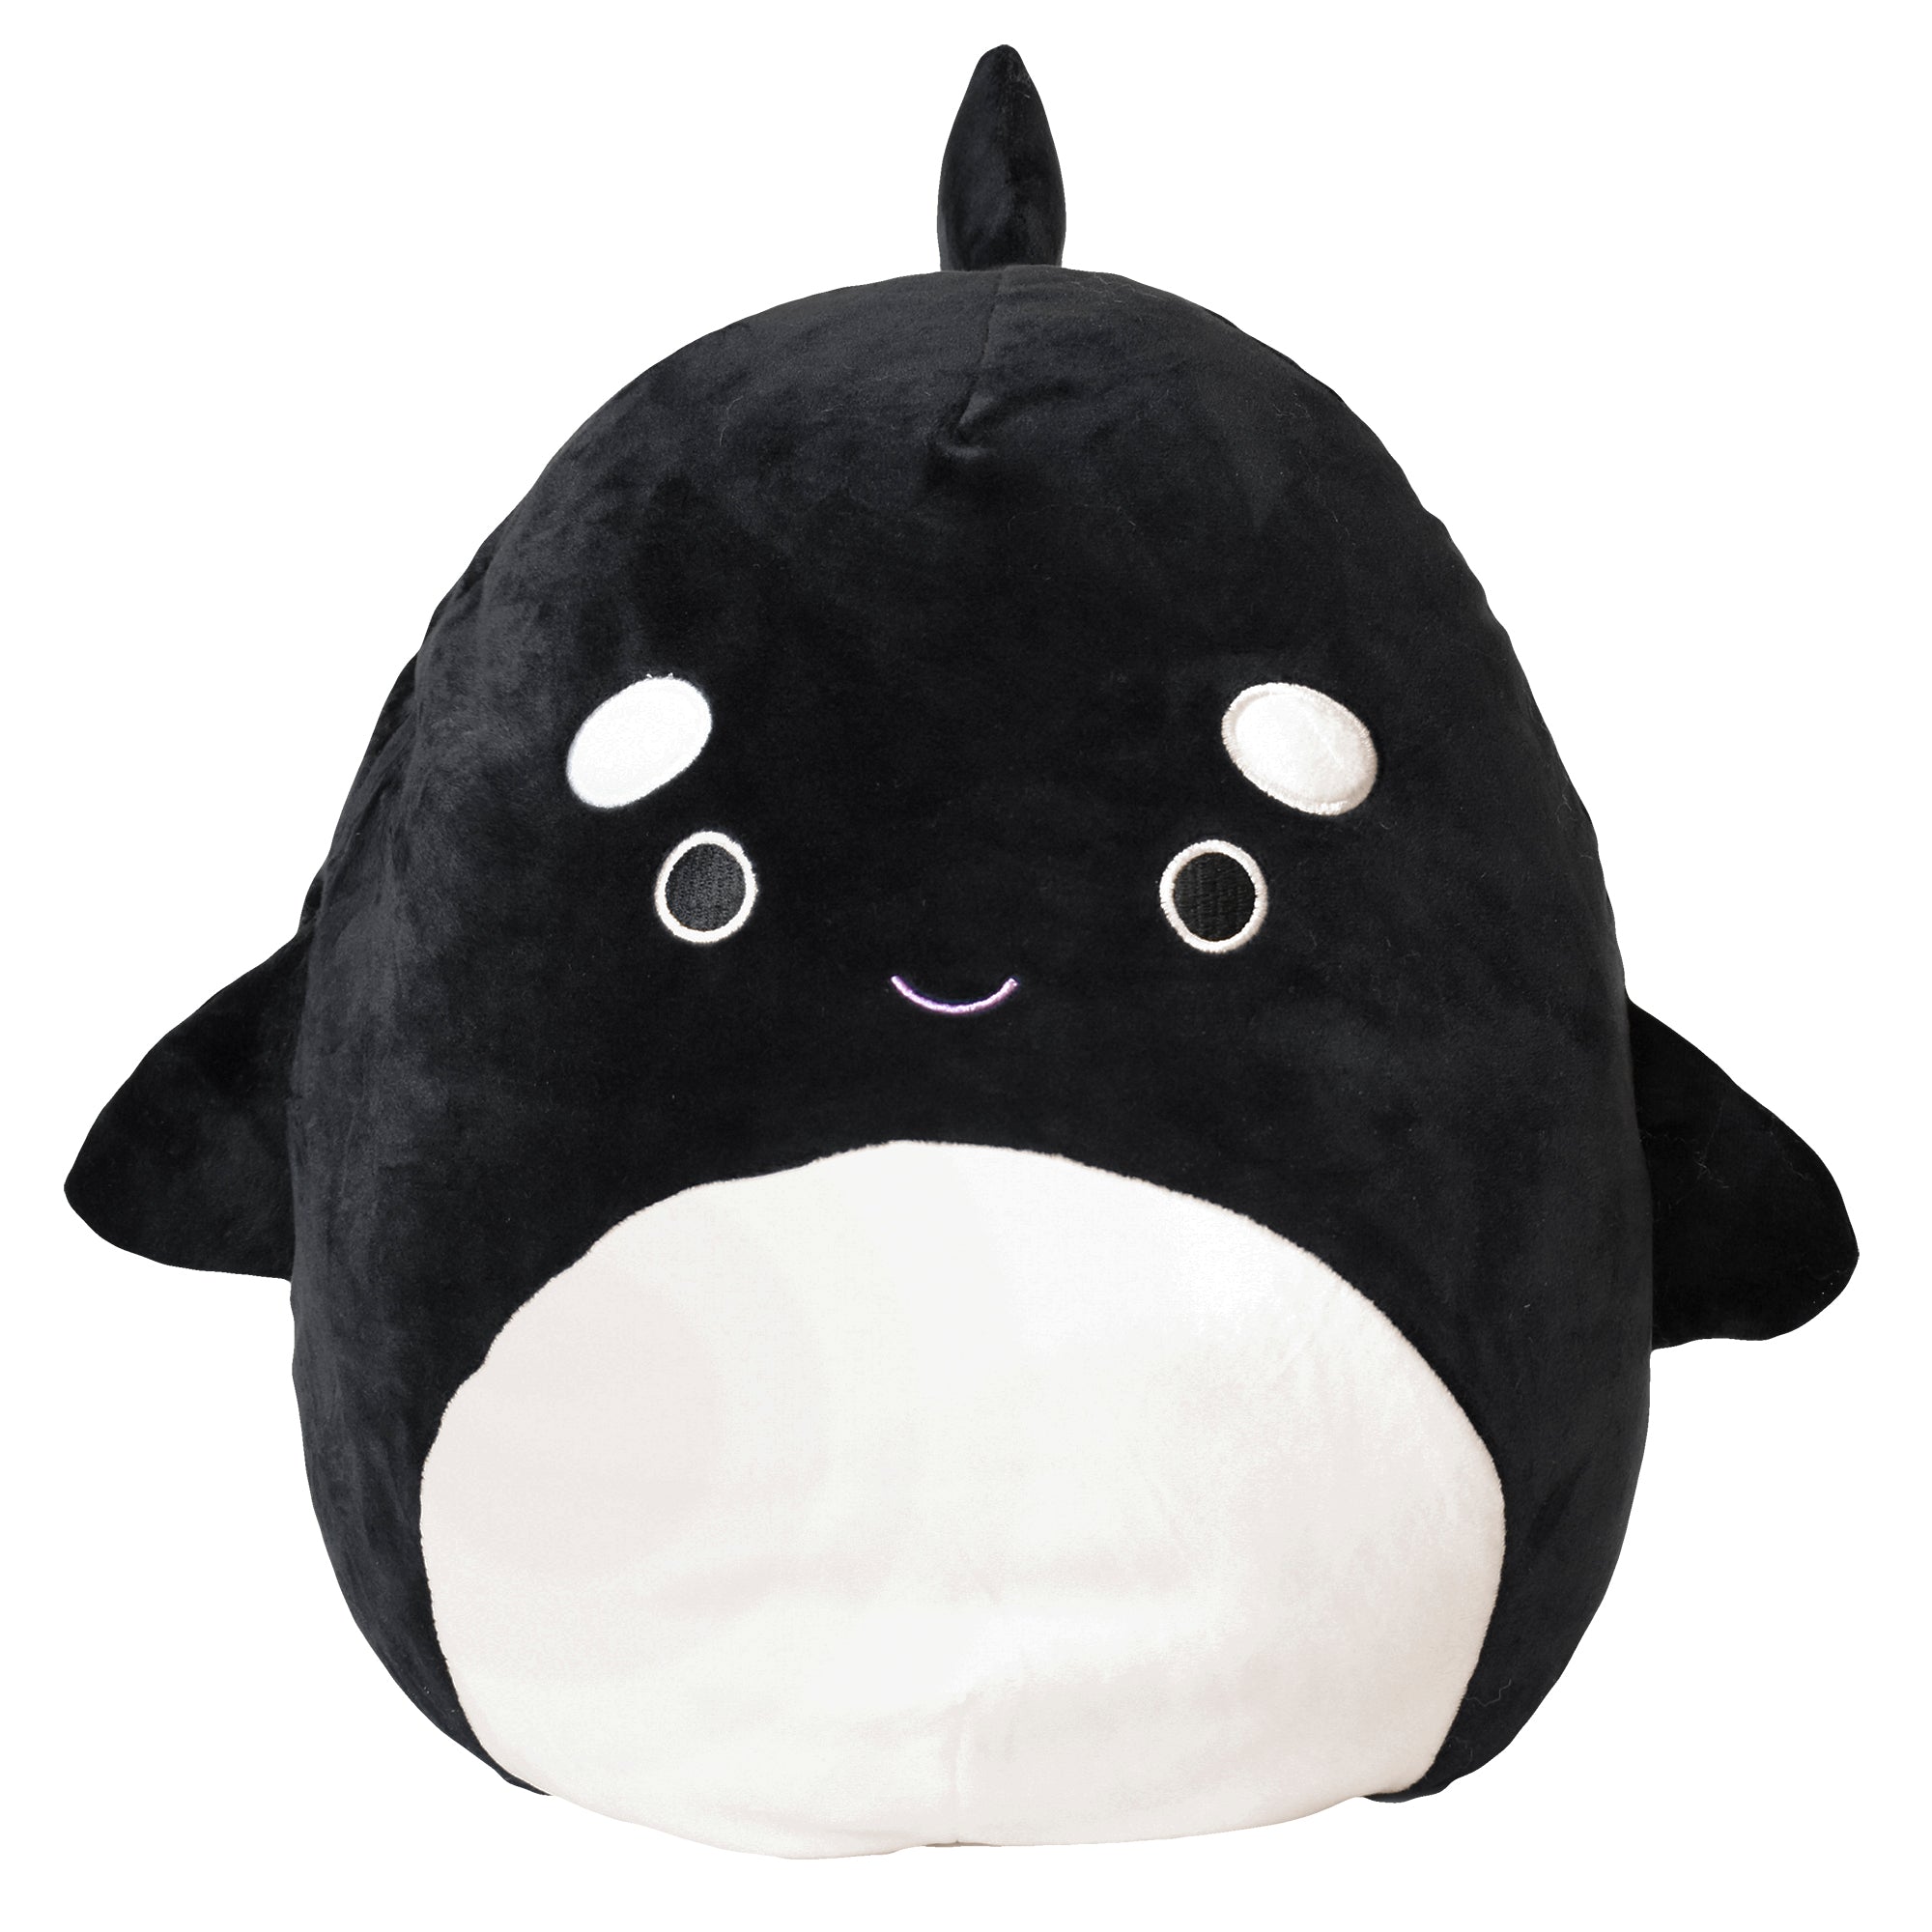 All Abount Nature 14 (36cm) Plush Orca Whale Soft Stuffed Animal